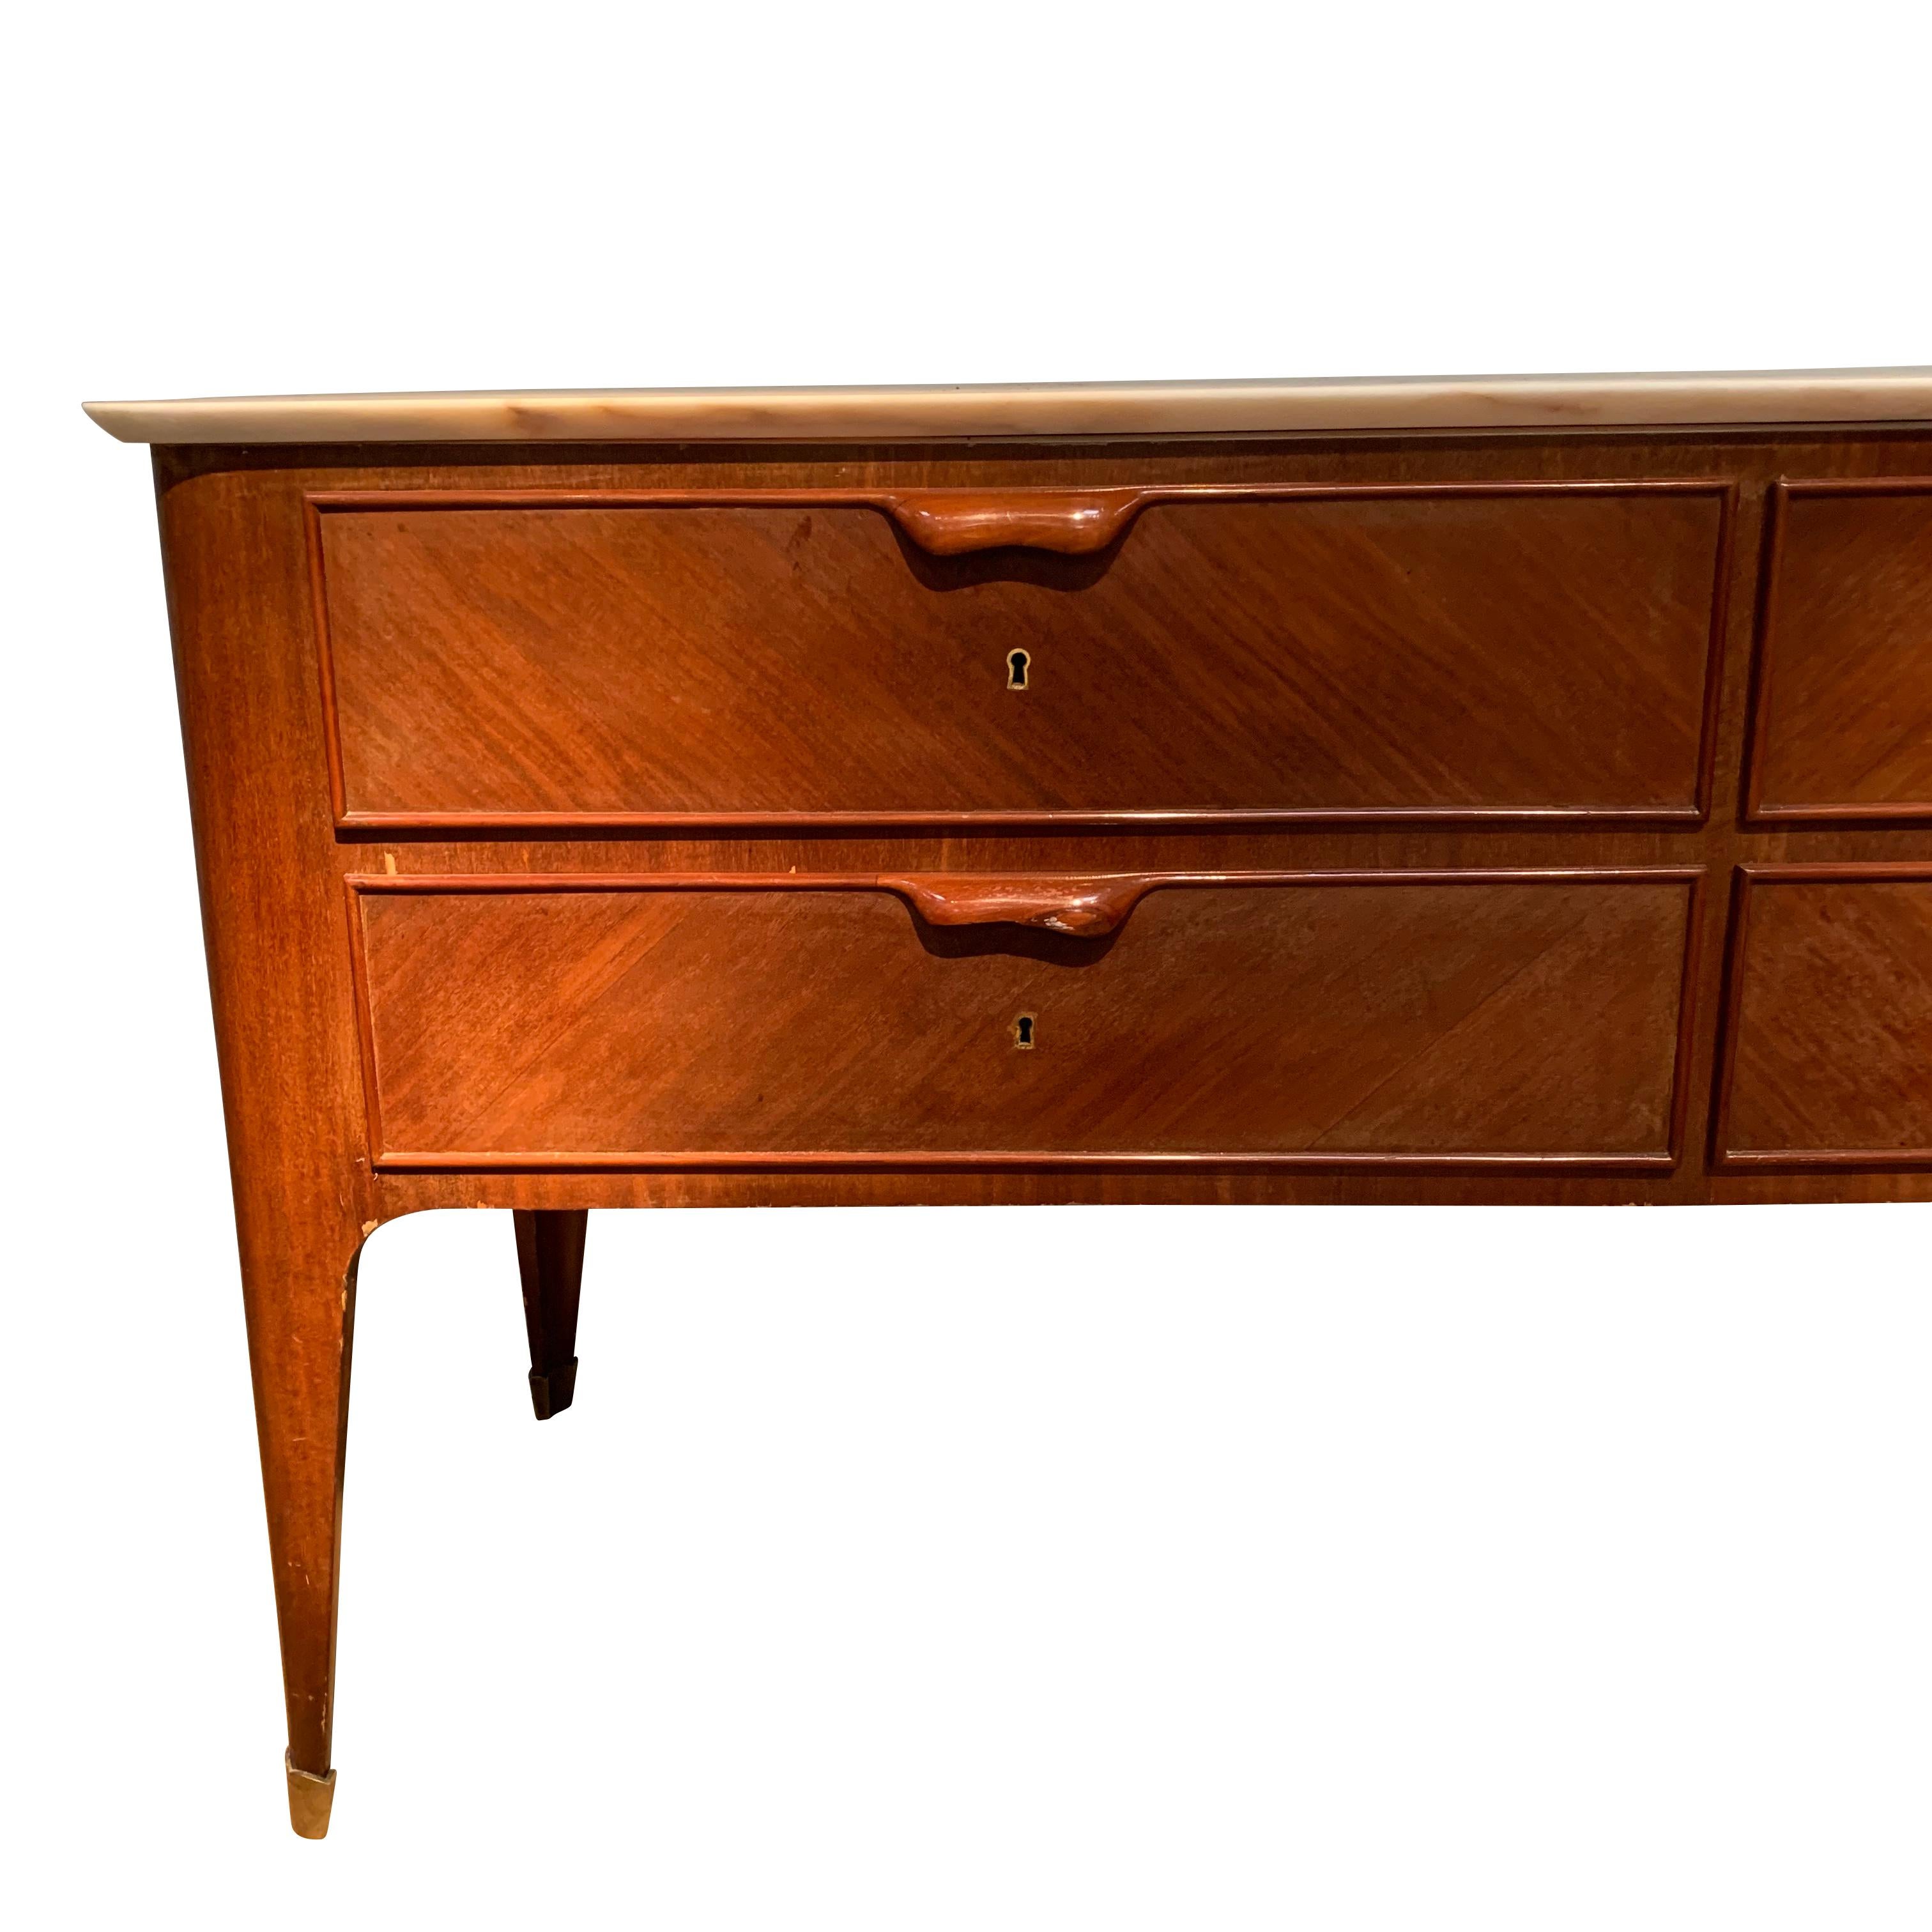 1940s Italian credenza designed by Paolo Buffa one of the most infuential architects and furniture designers of the 20th century.
This designer uses palisander wood topped by marble to create a streamlined and elegant credenza. 
Palisander handles